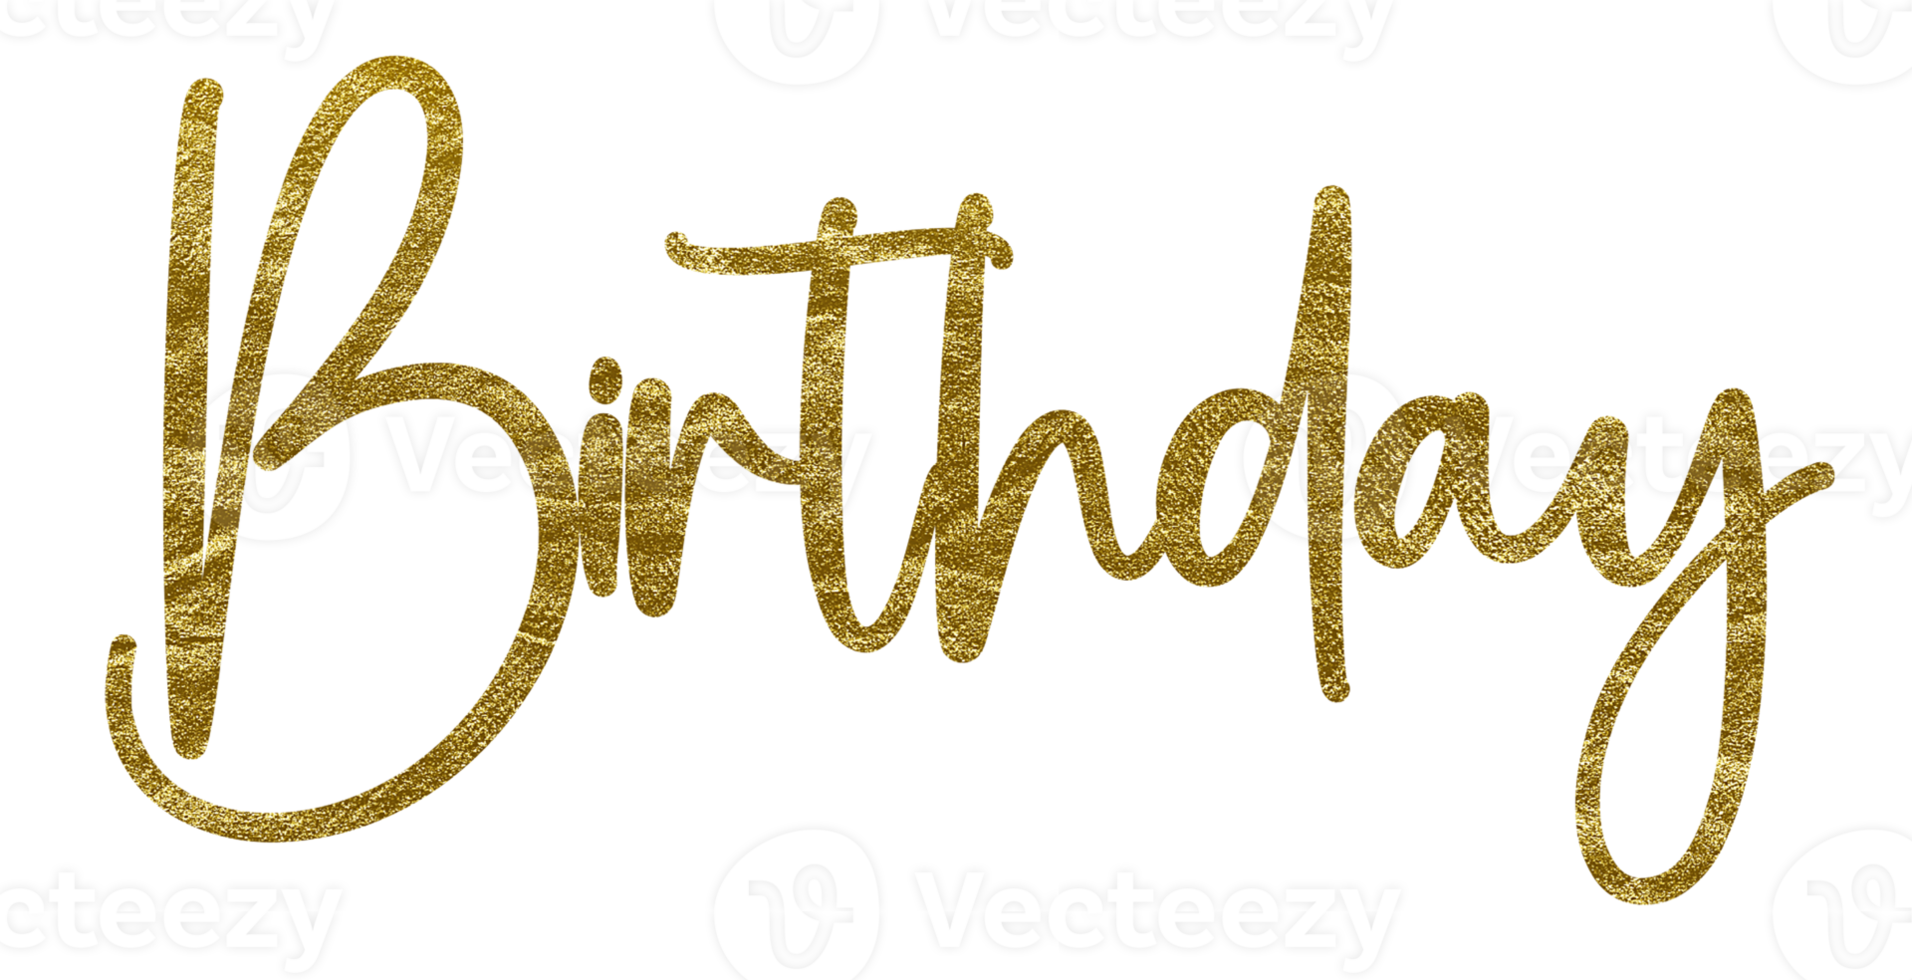 Golden Text Lettering Birthday cut out png